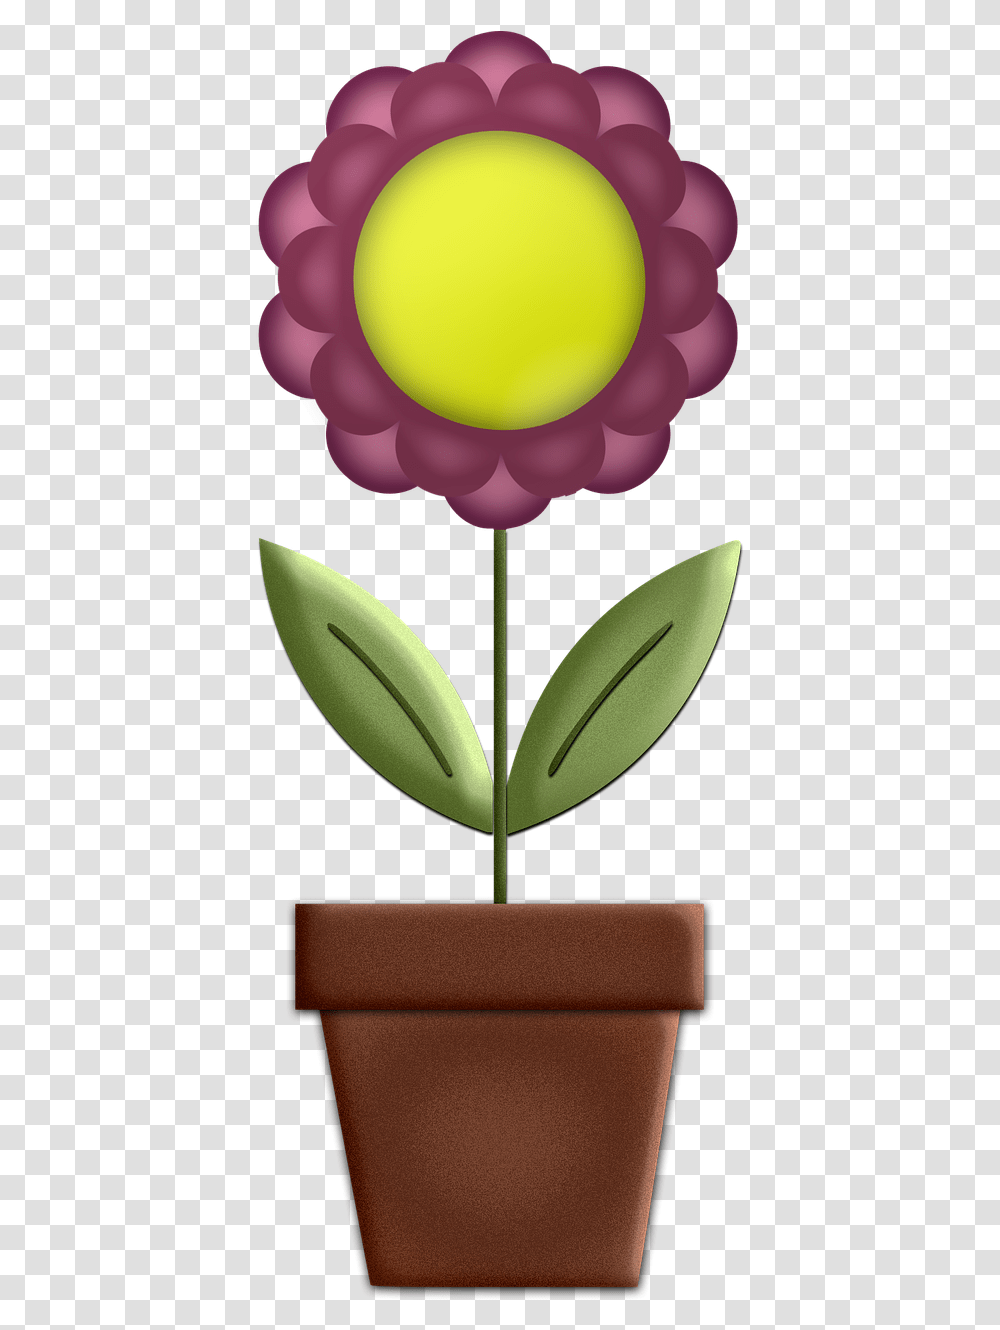 Flower Digital Art Design Free Picture Tulip, Plant, Blossom, Balloon, Pond Lily Transparent Png